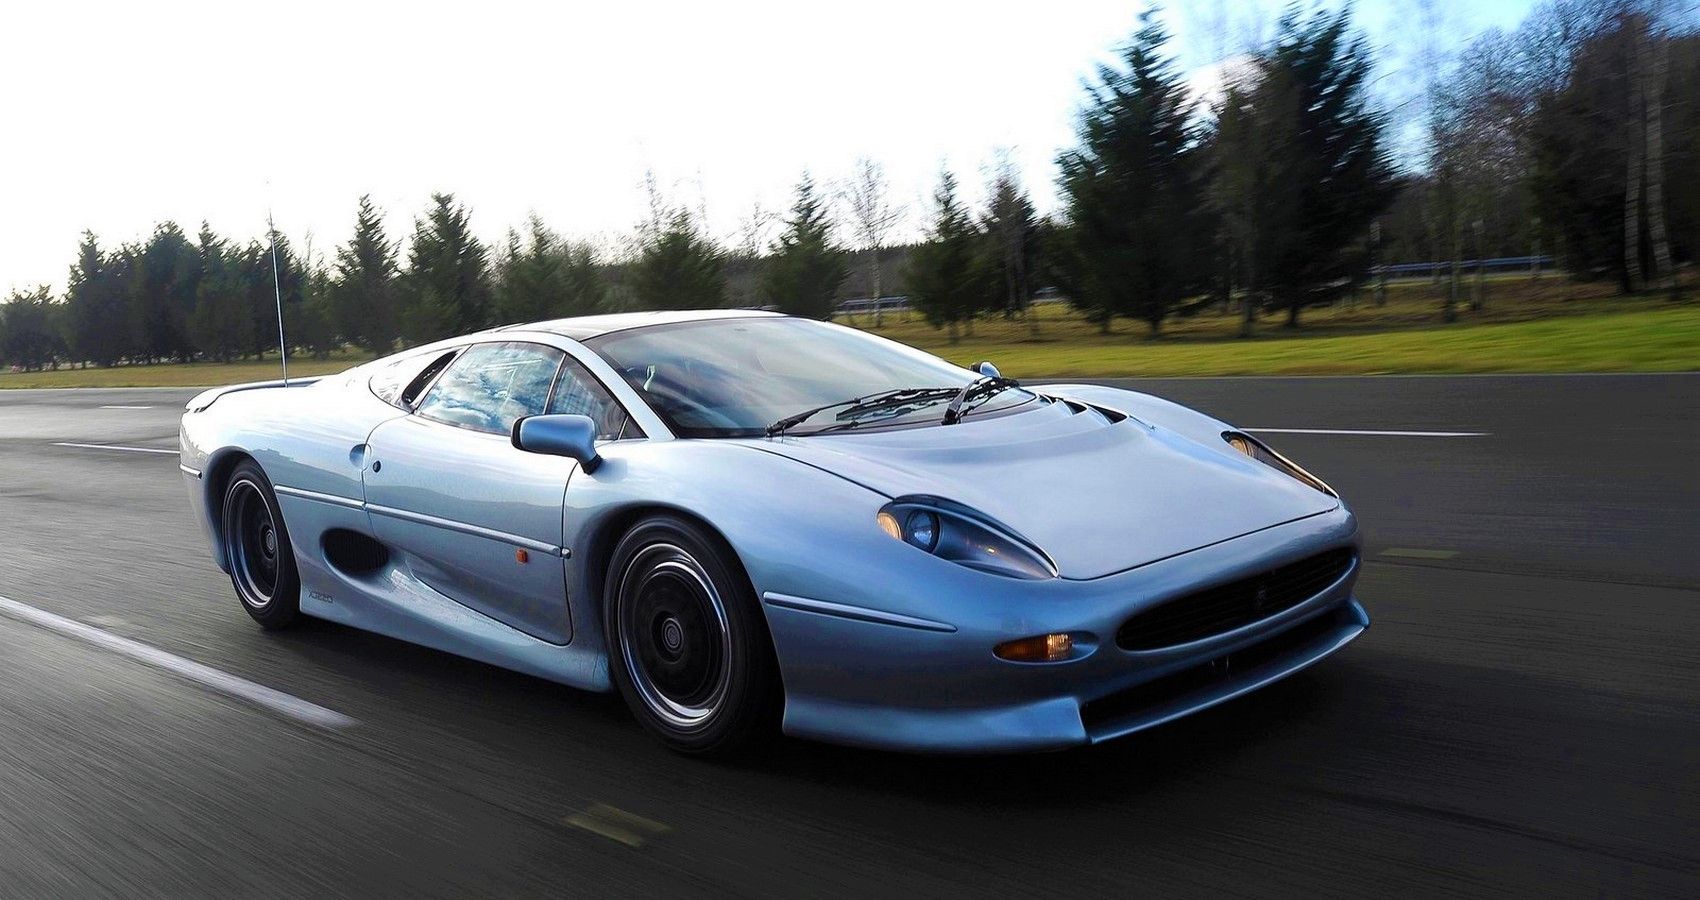 This Is Why The Super-Rare Jaguar XJ220 Is A Collector’s Dream